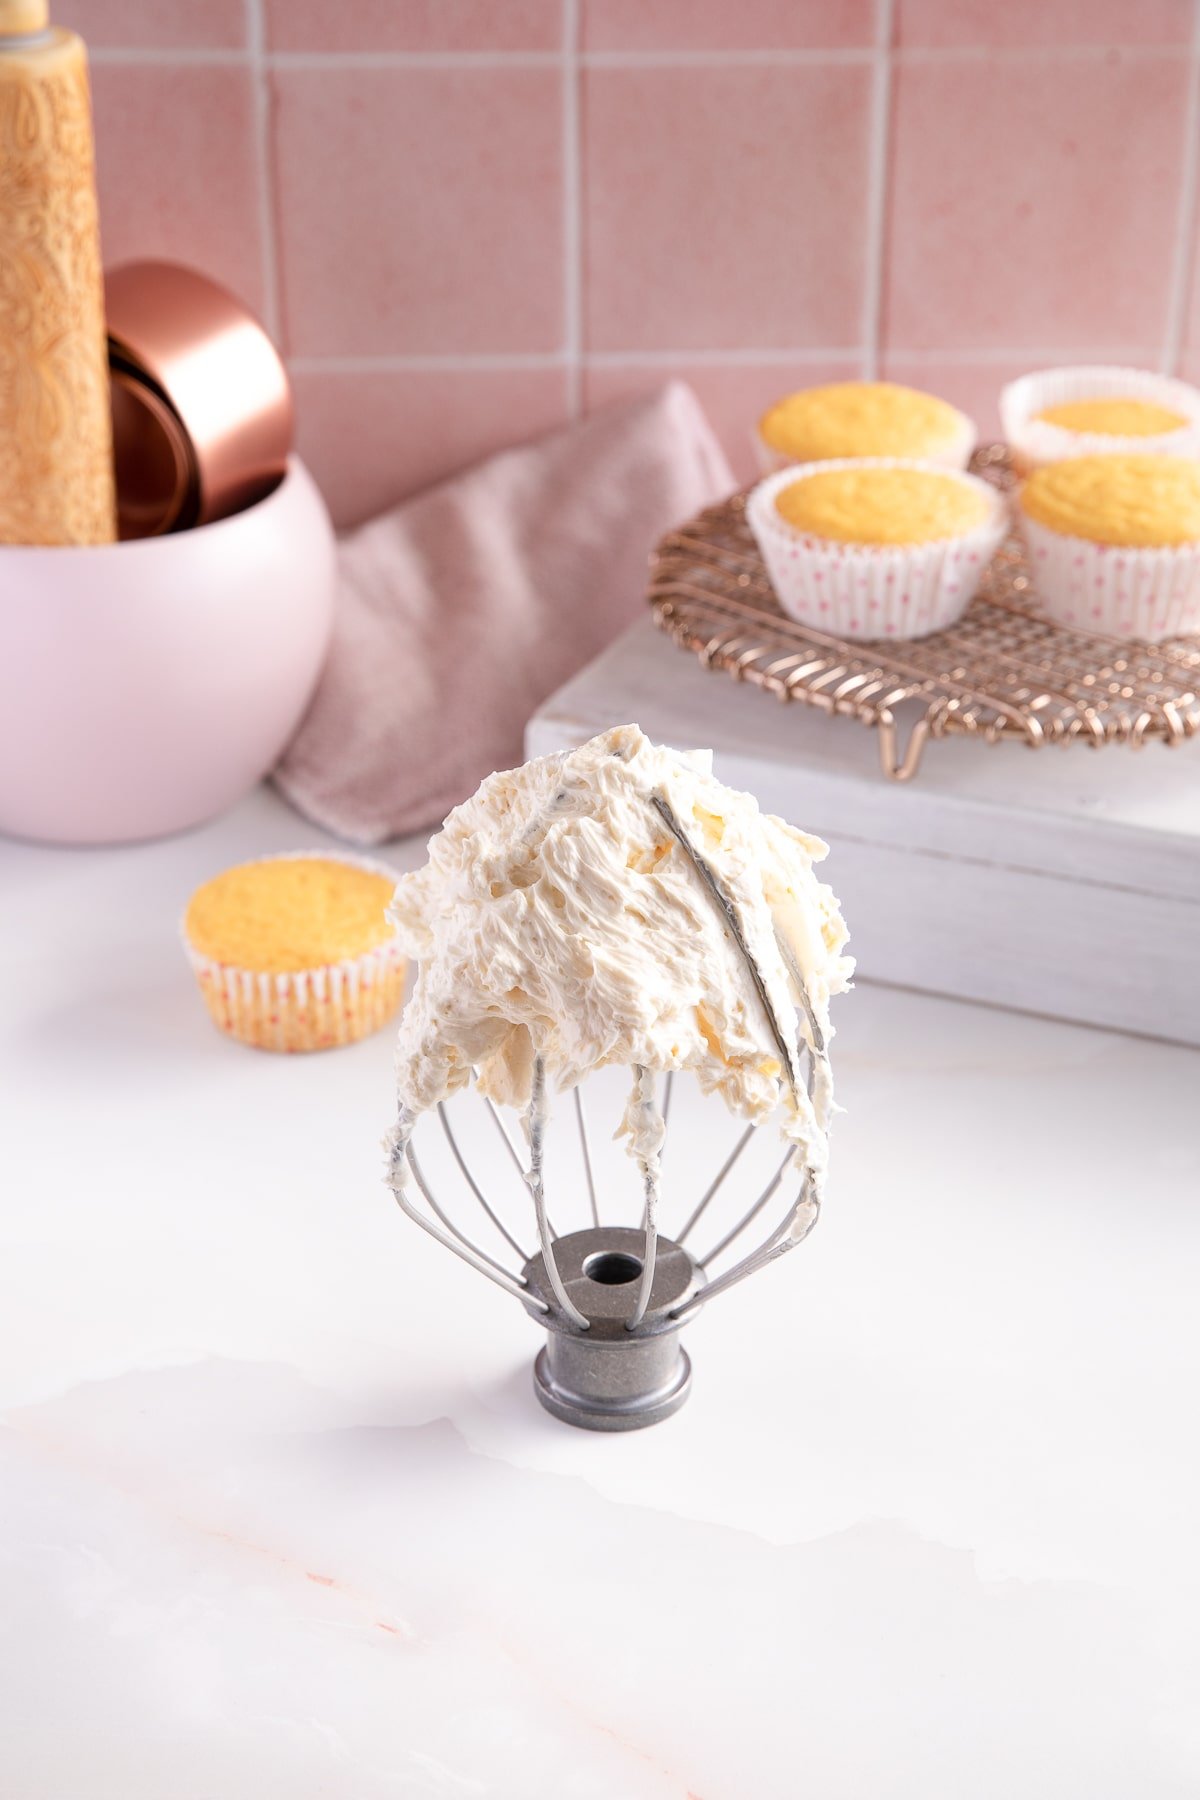 Sweetened Condensed Milk Frosting on whisk.